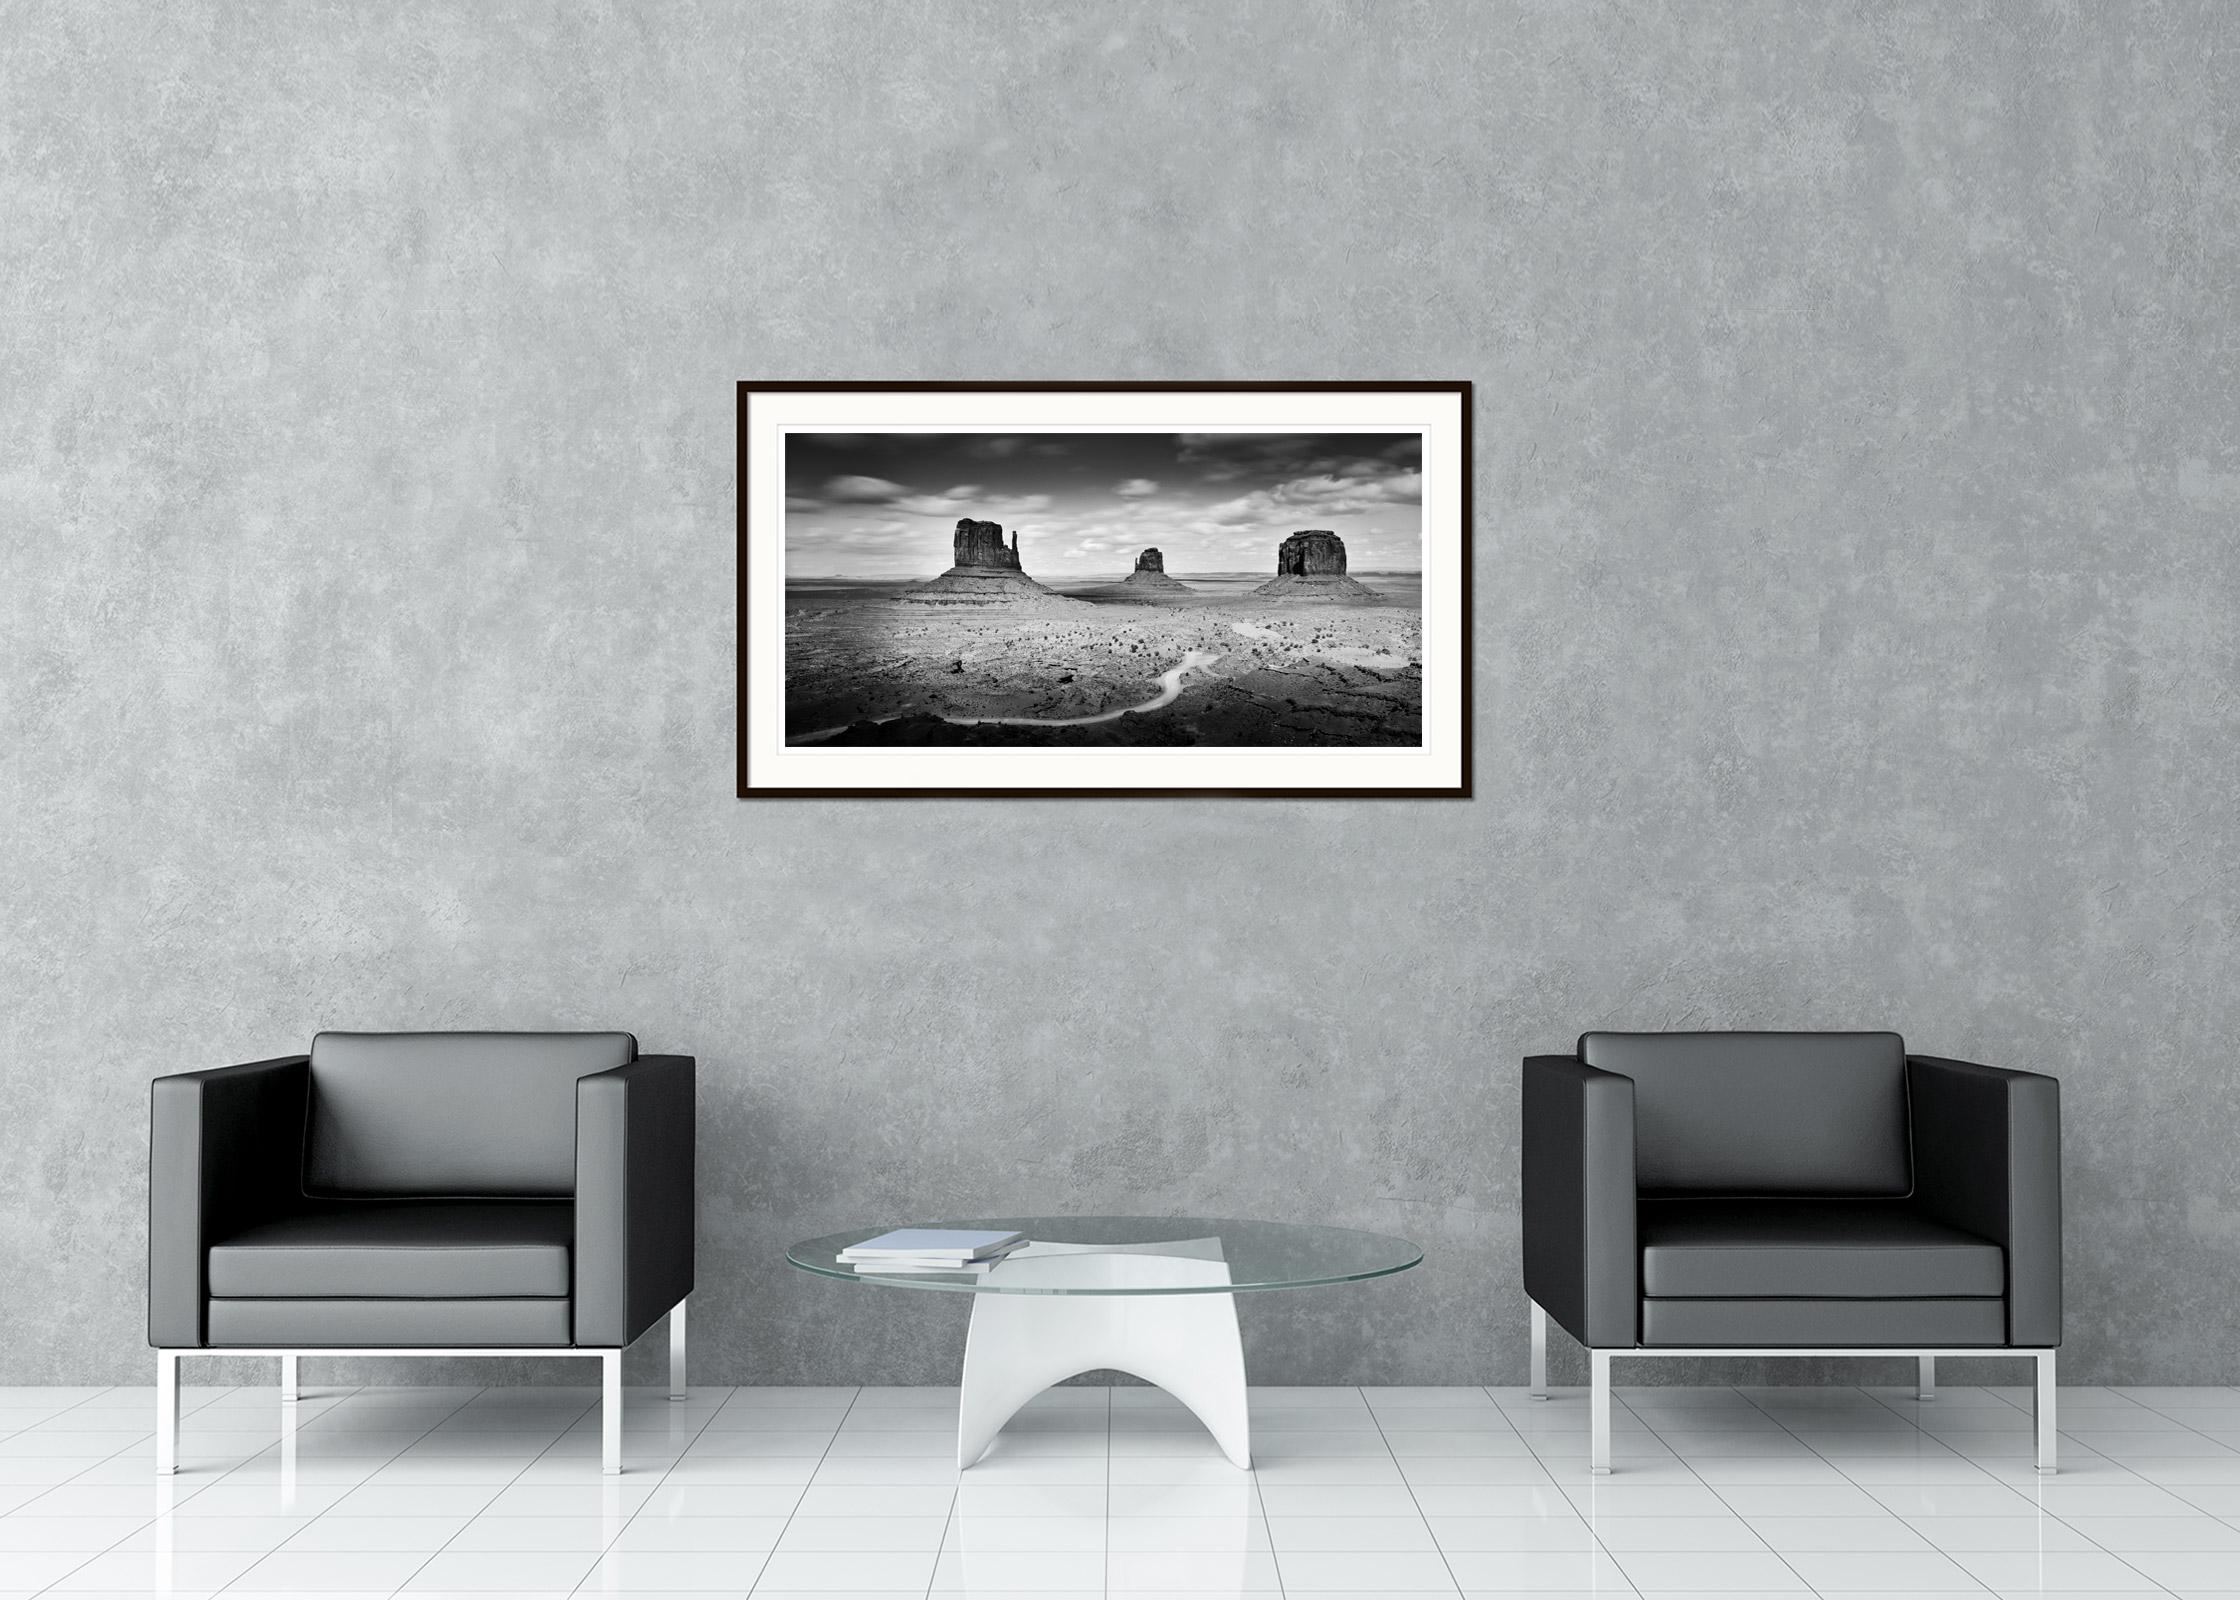 Black and White Fine Art panorama landscape photography. Monument Valley, Navajo Nation, Arizona, USA. Archival pigment ink print, edition of 9. Signed, titled, dated and numbered by artist. Certificate of authenticity included. Printed with 4cm